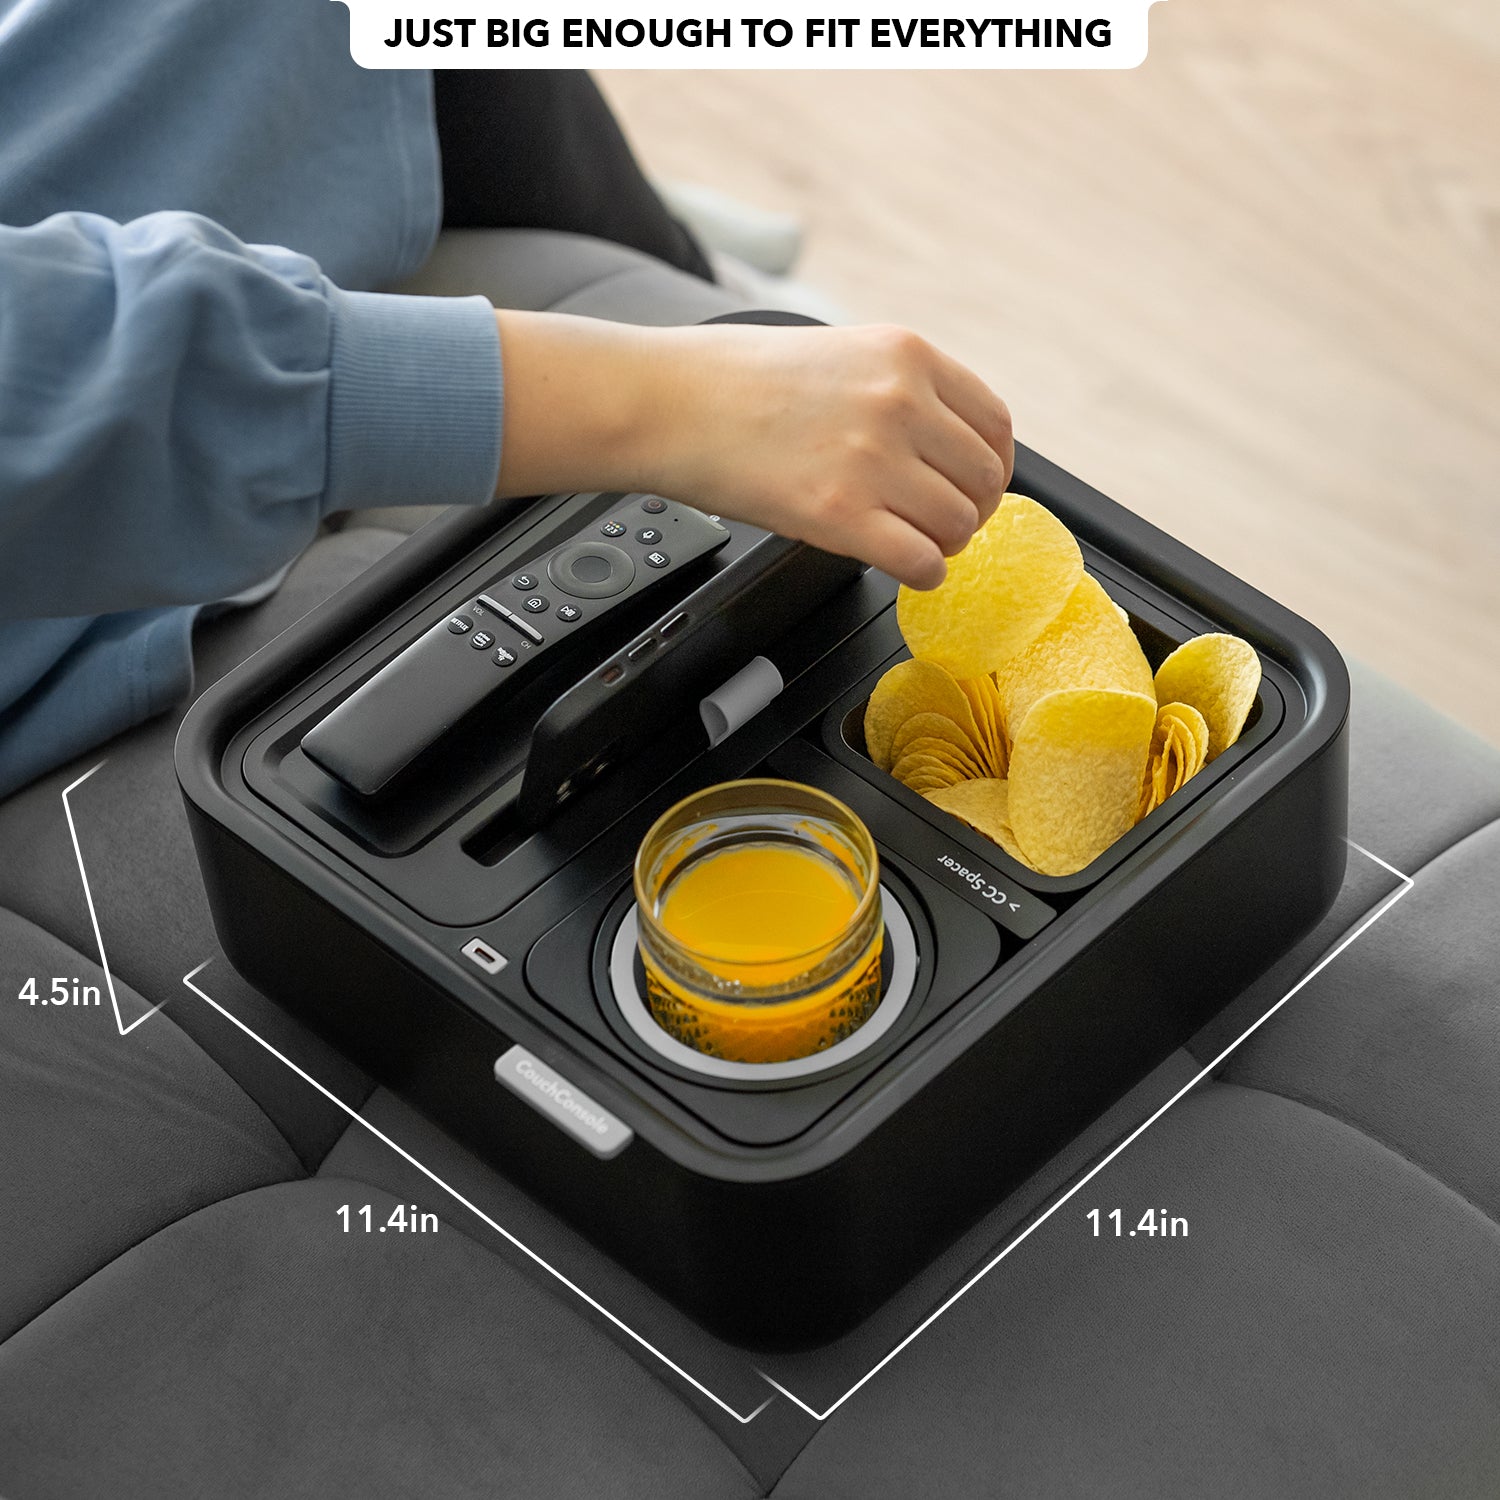 CouchConsole Self-Balancing Snack Tray, PhoneStand, Charging ,Black/Black